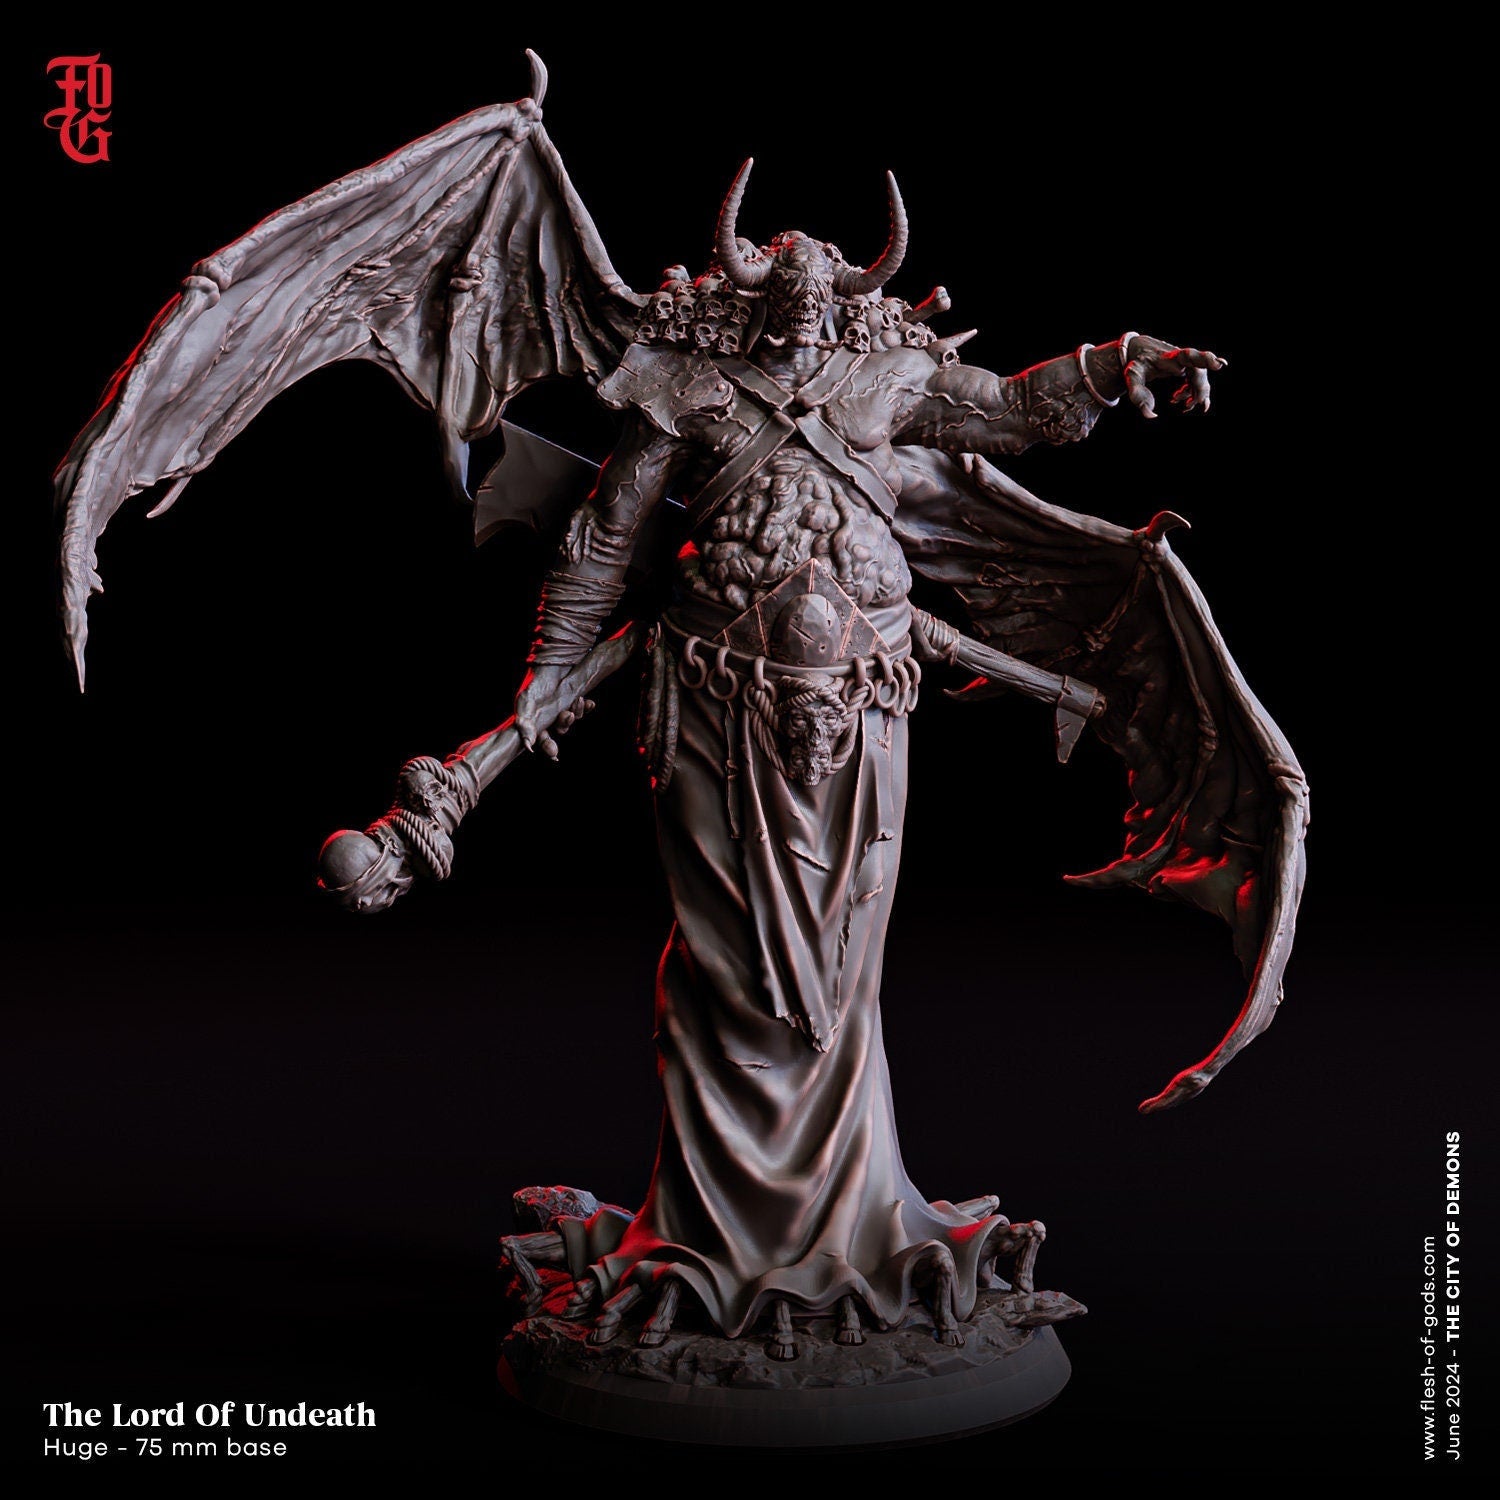 Lord of Undeath Demonic Miniature | Malevolent Figure for Tabletop RPGs | 75mm Base - Plague Miniatures